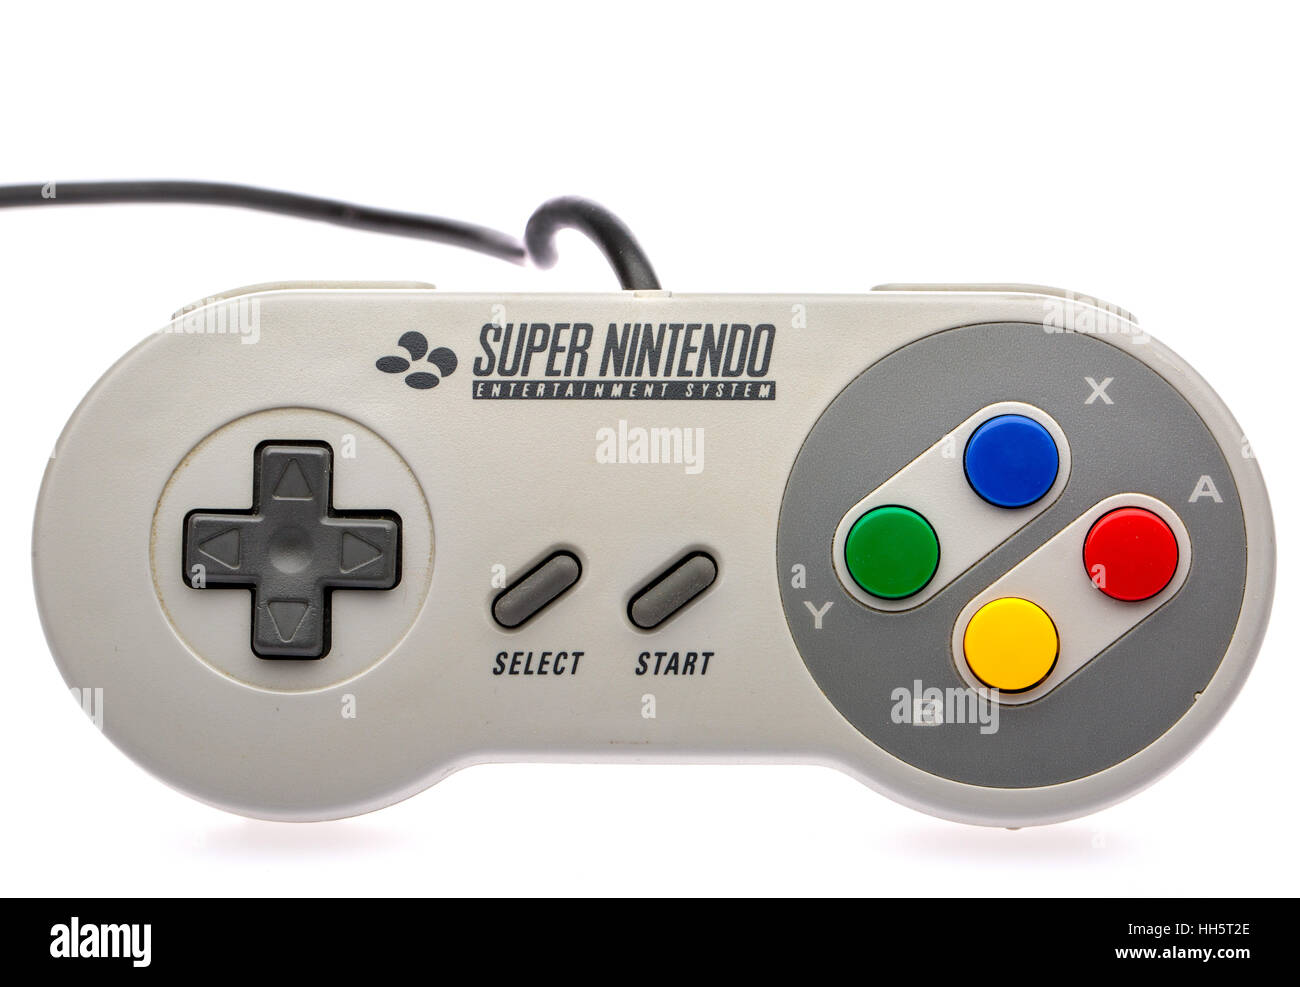 Super Nintendo Computer Game controller from the 1990's Stock Photo